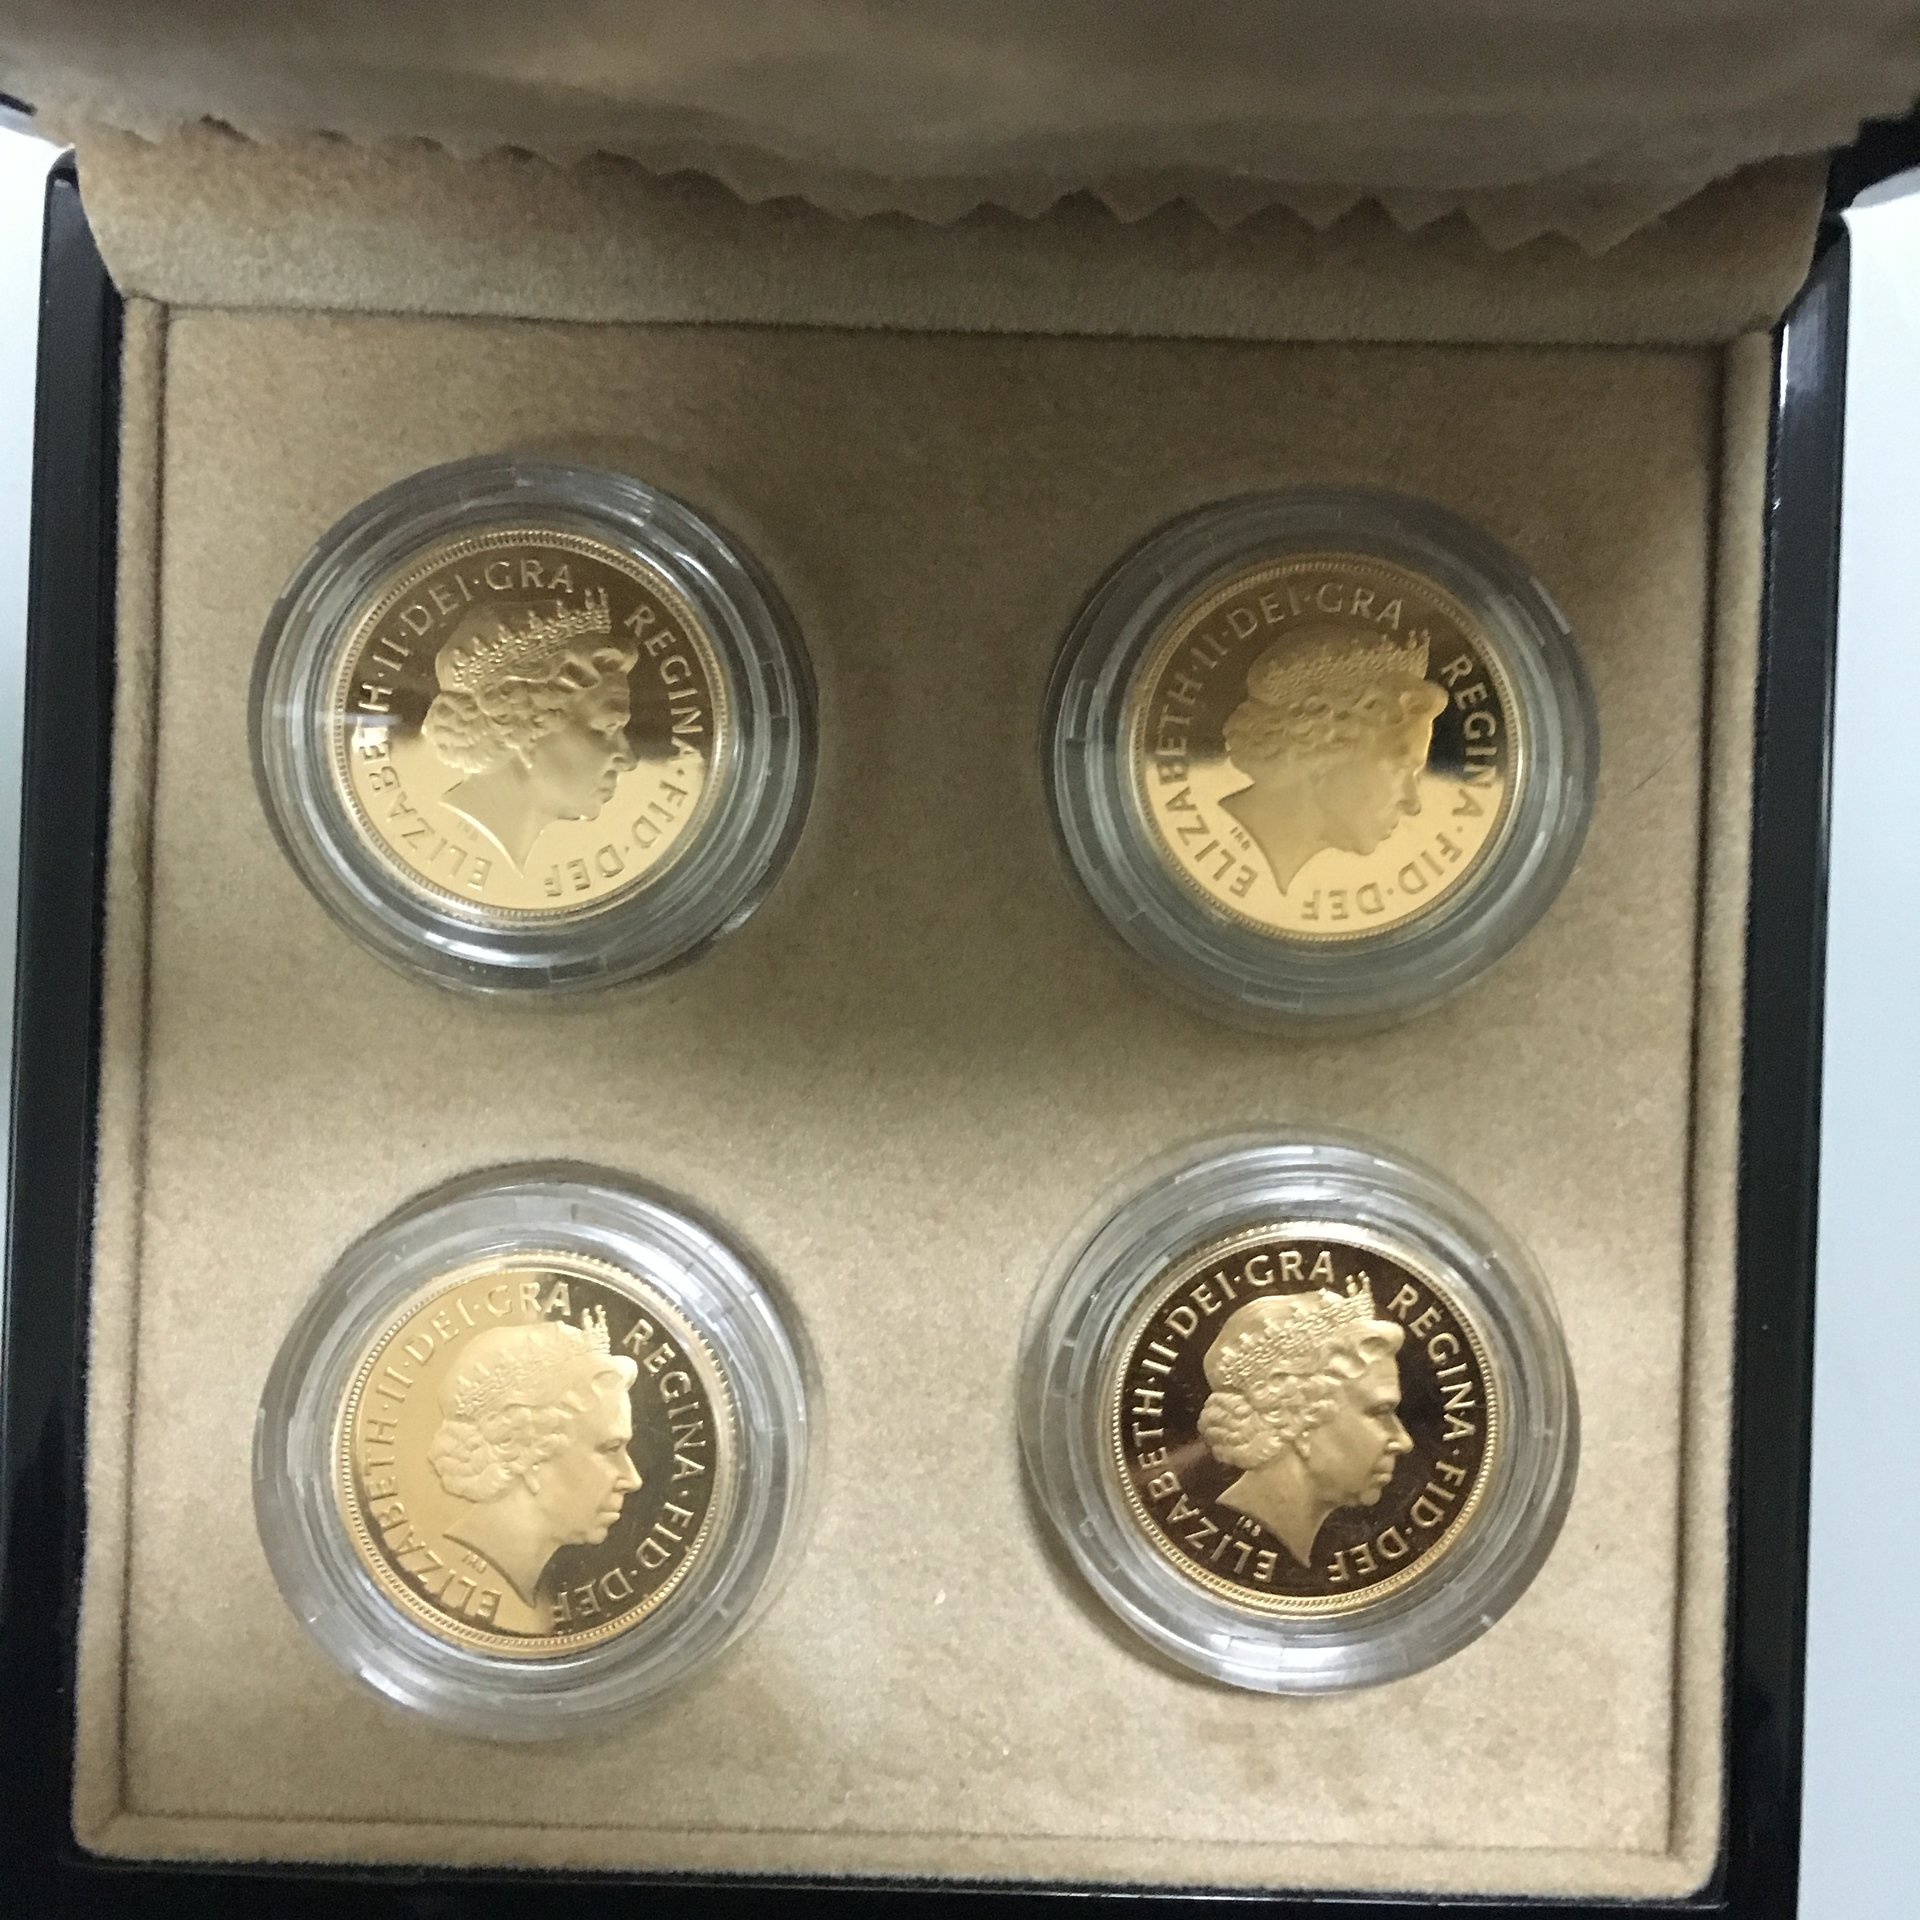 2002, 2010, 2011 and 2012 Sovereigns Obv.JPG